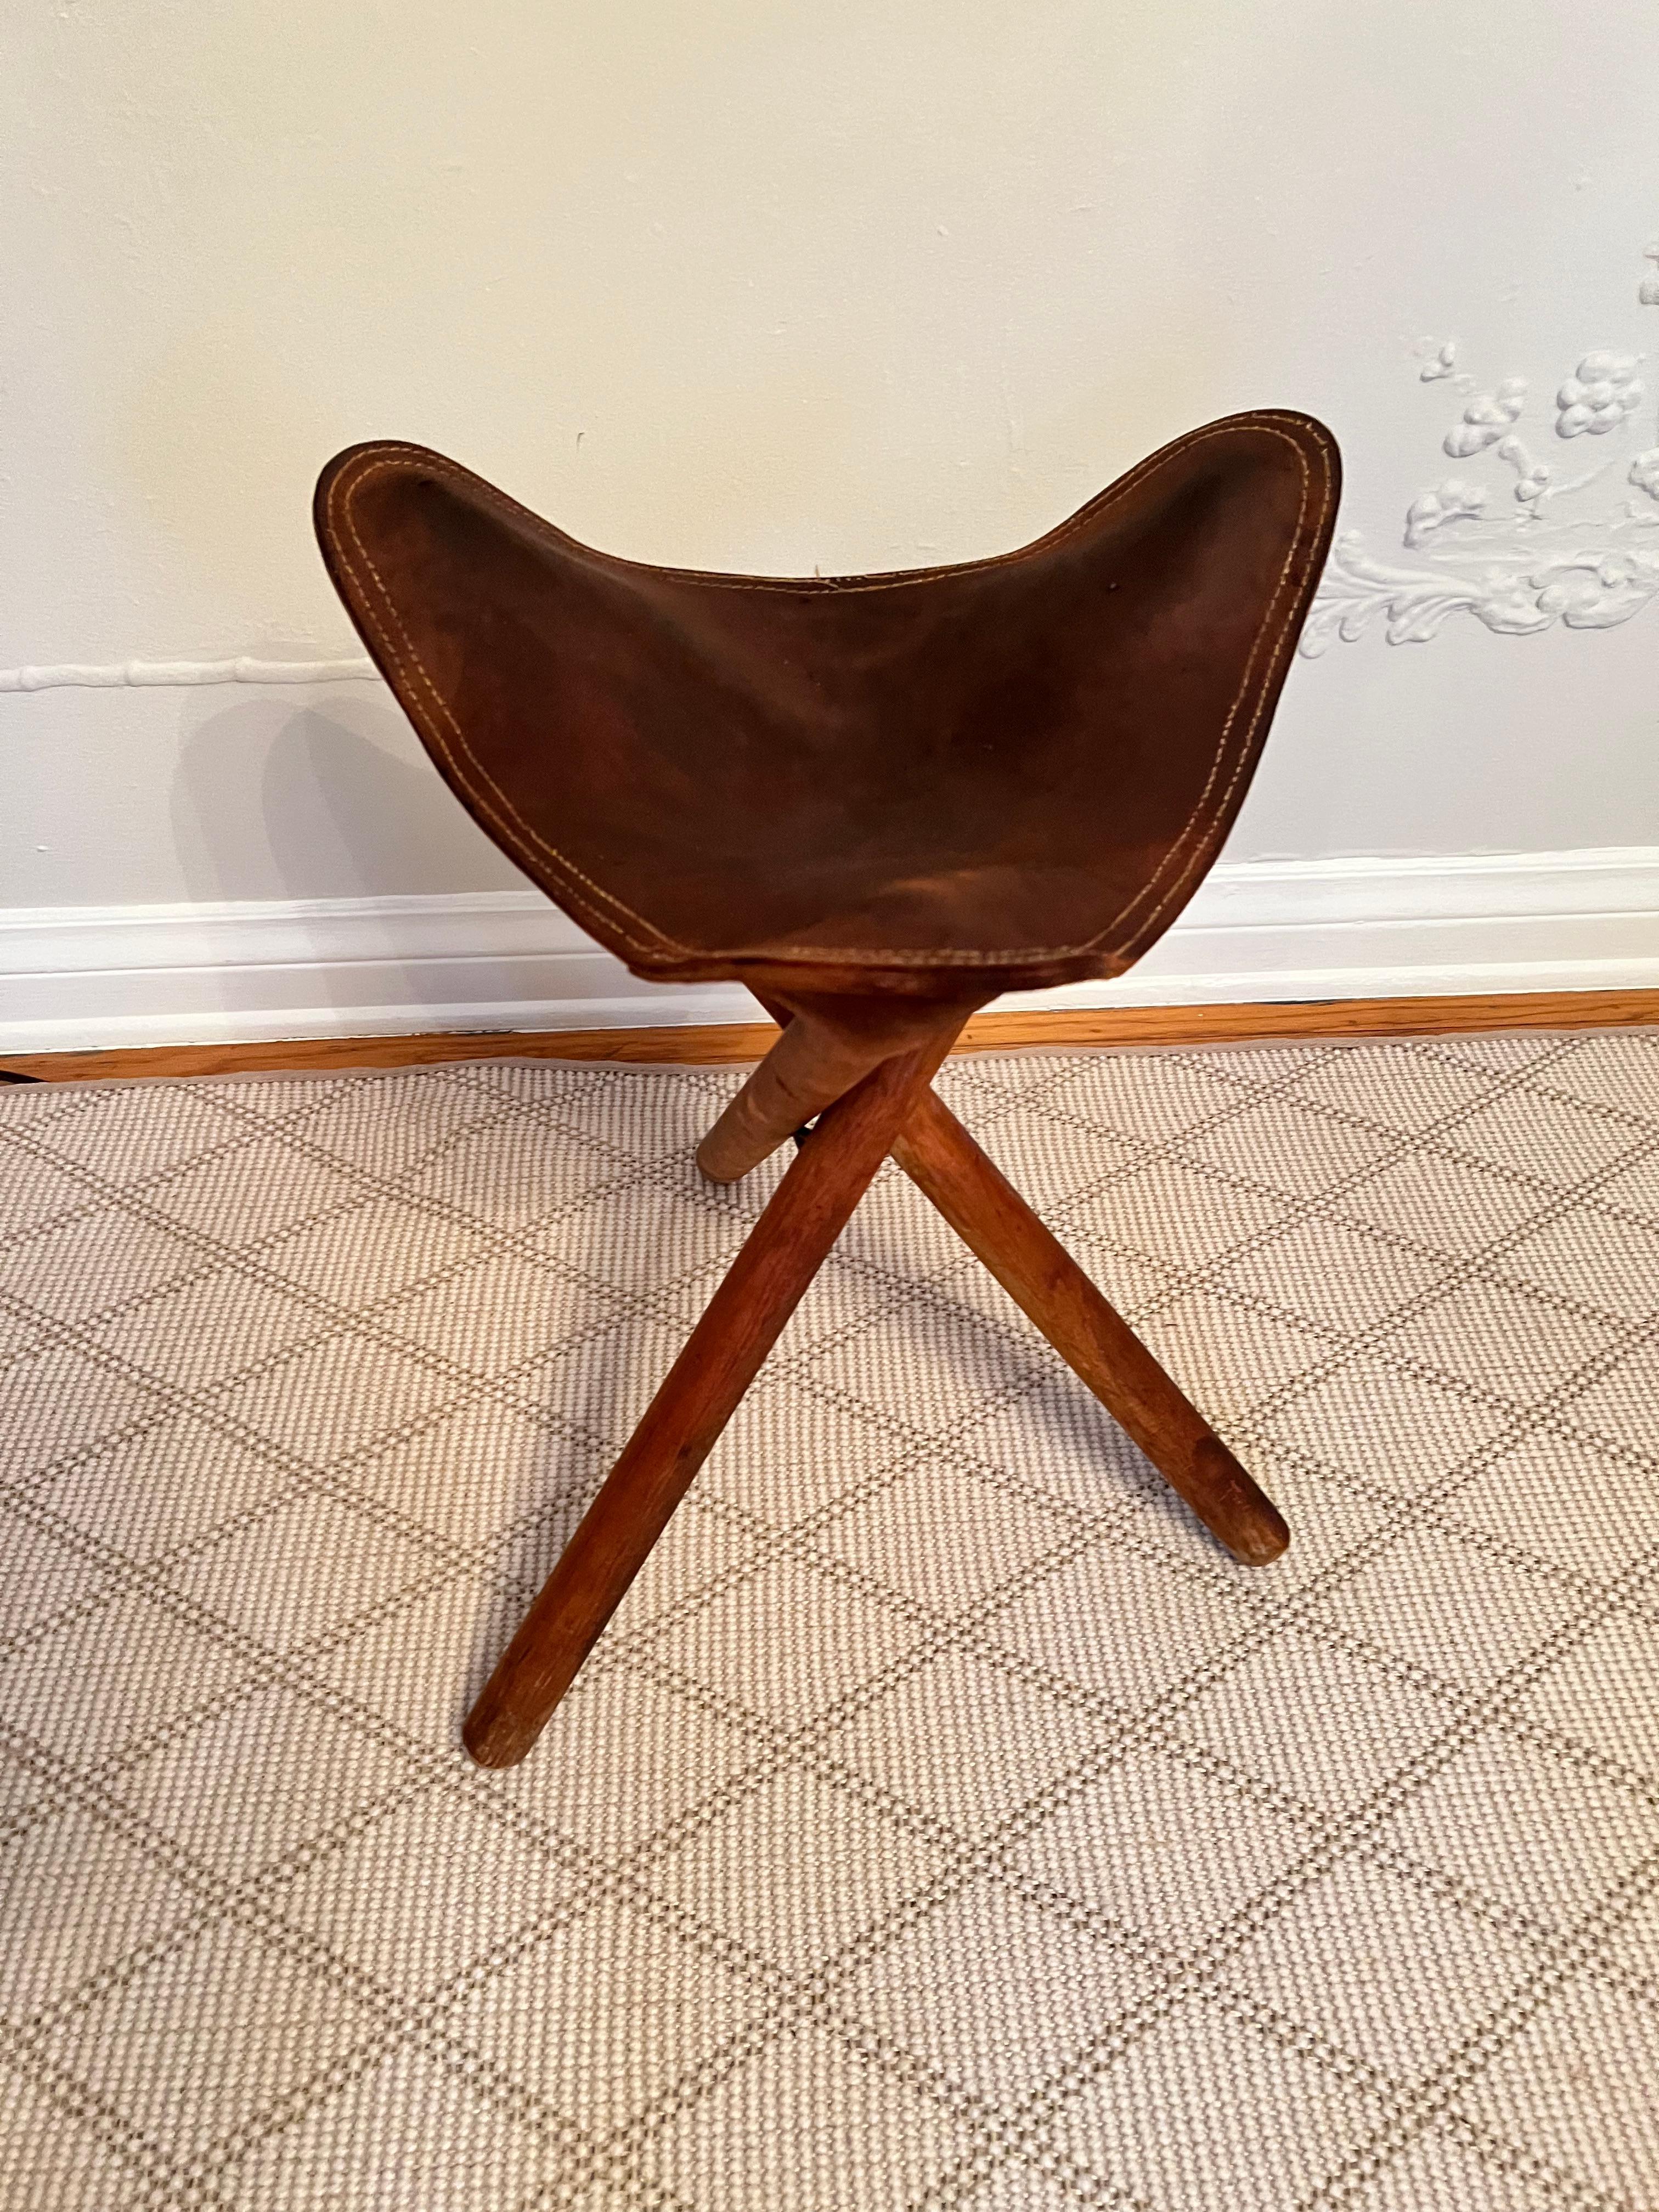 Tipod Leg Wooden Stool with Leather Seat 5